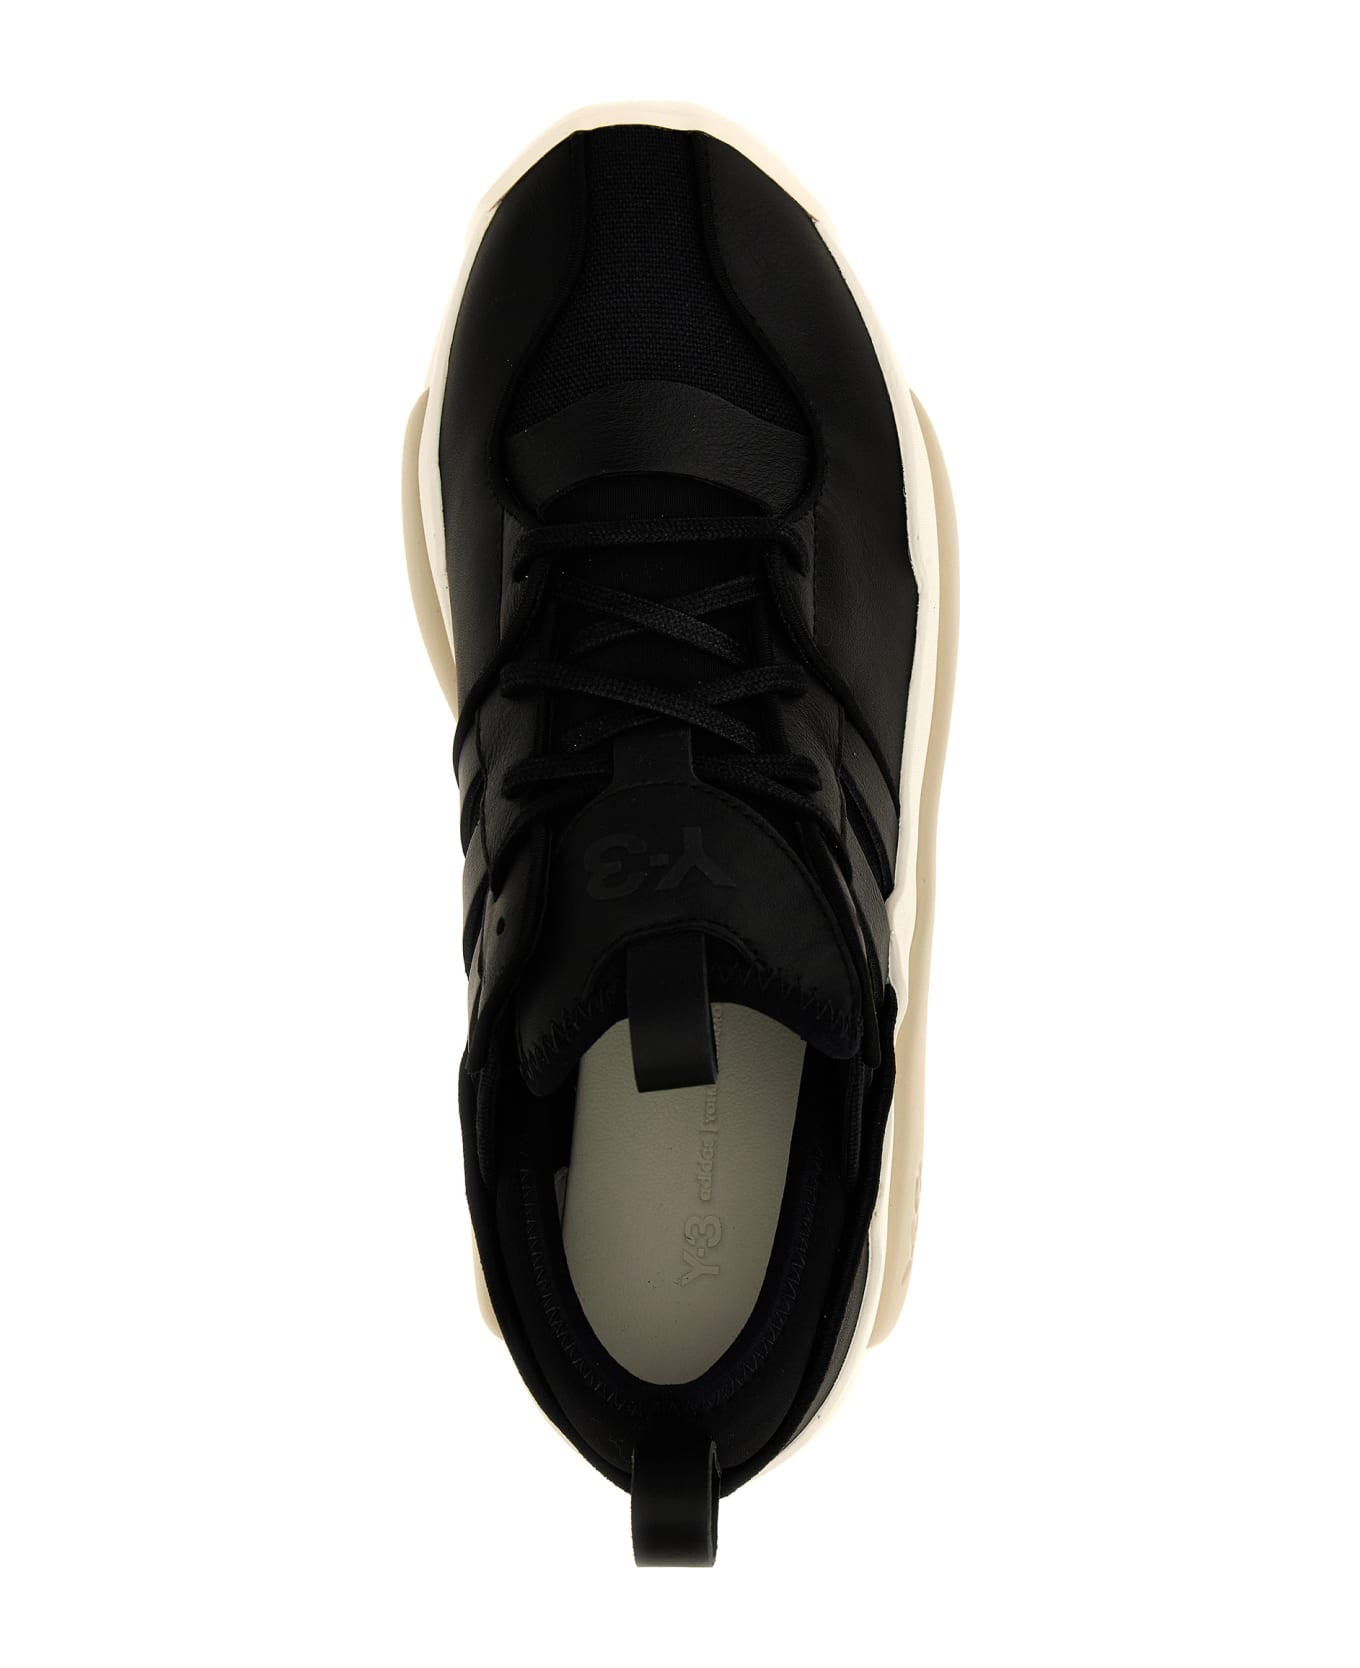 Y-3 'rivalry' Sneakers - White/Black スニーカー